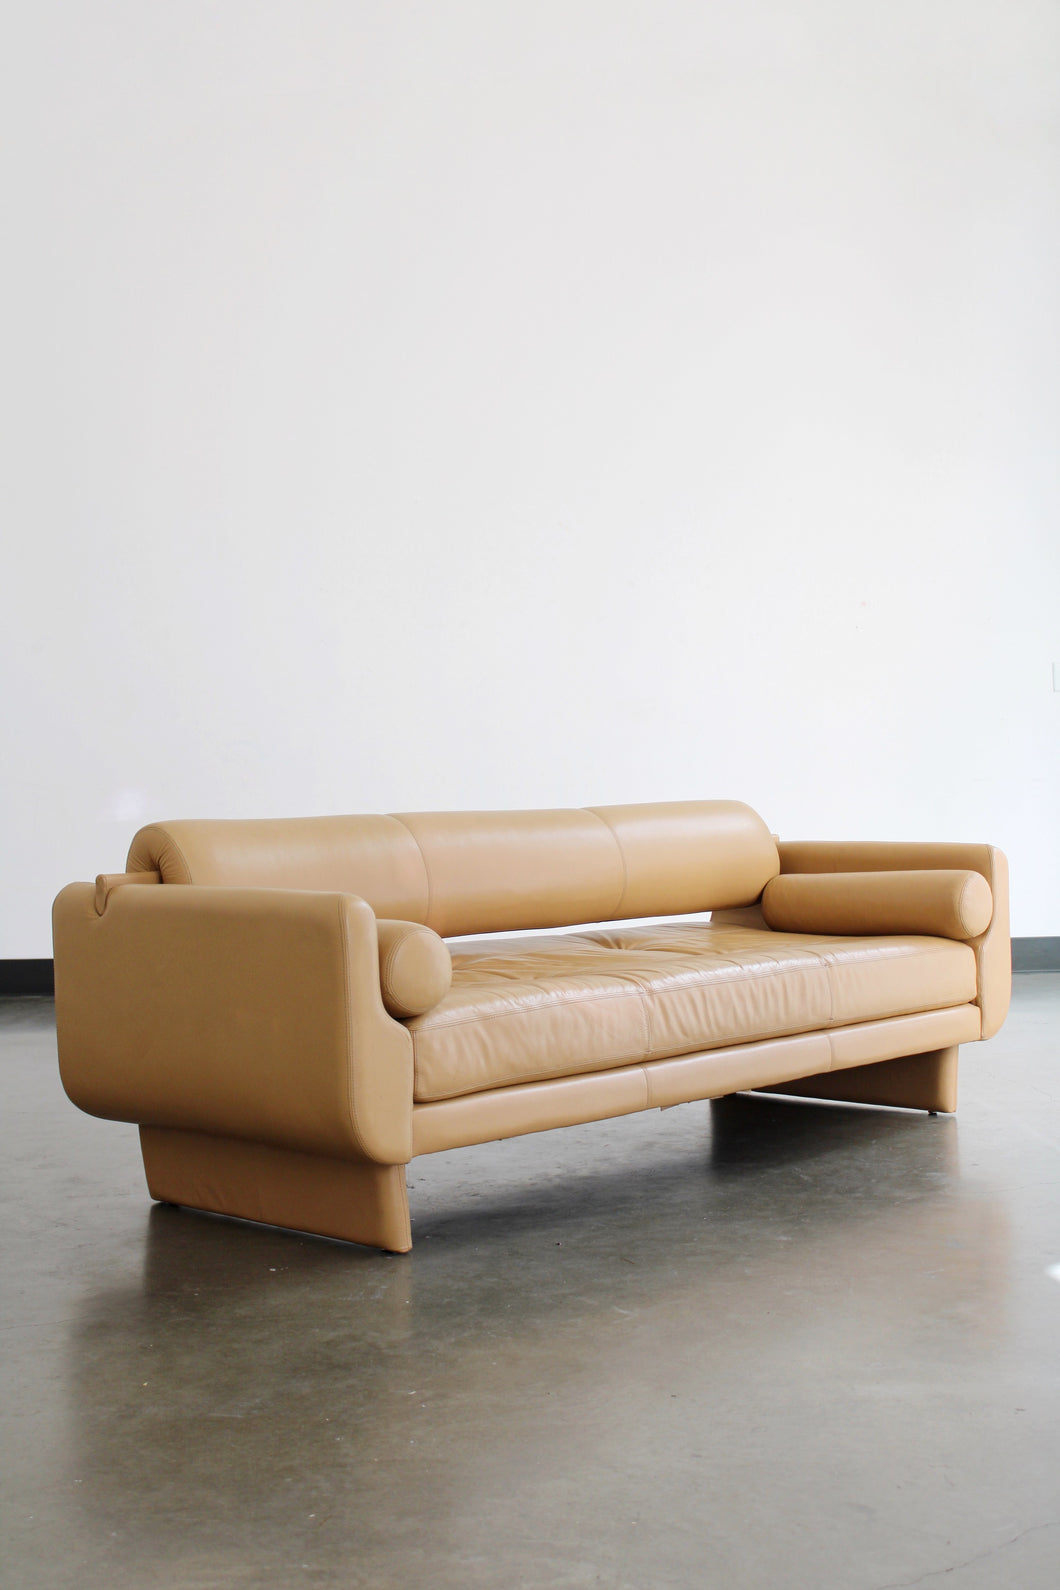 Matinee Daybed Sofa By Vladimir Kagan For American Leather